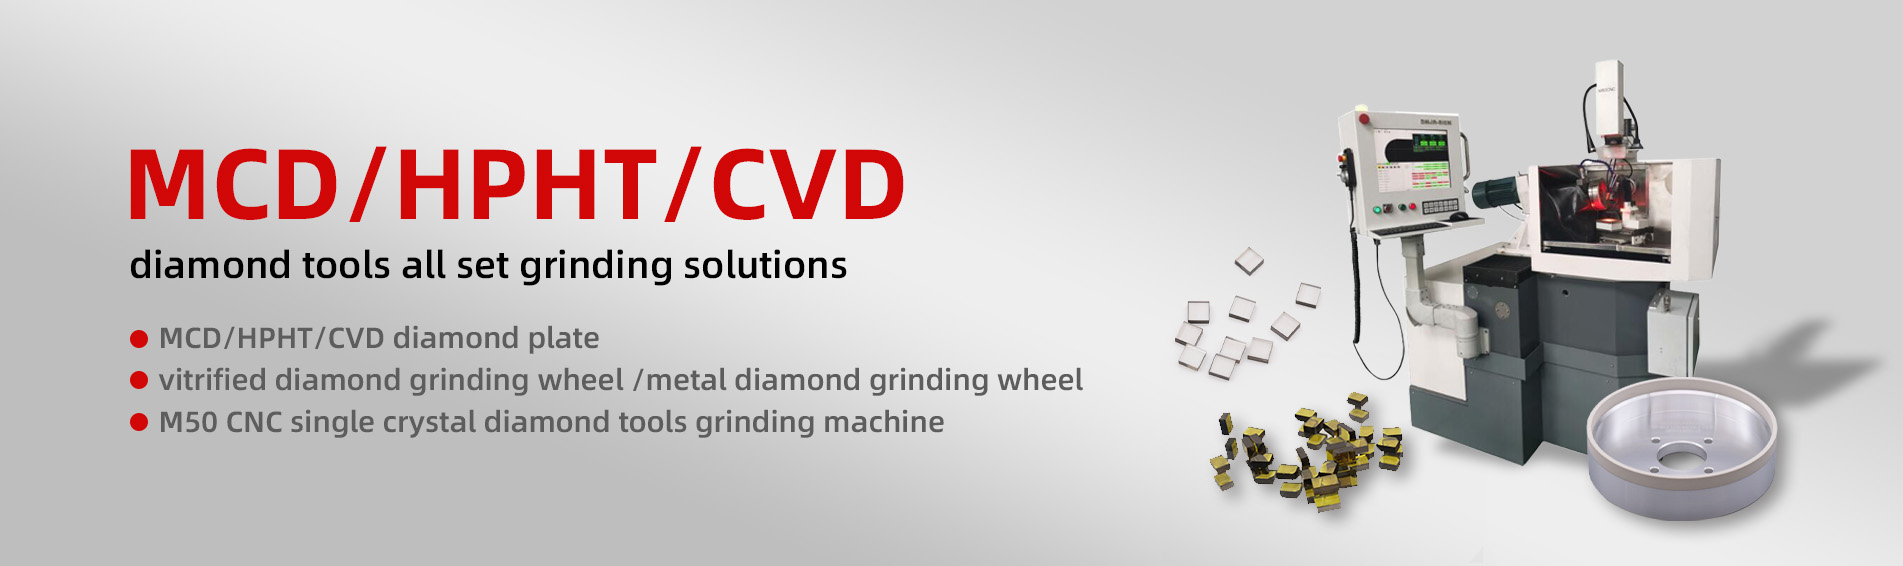 MCD cutting tools grinding solutions 